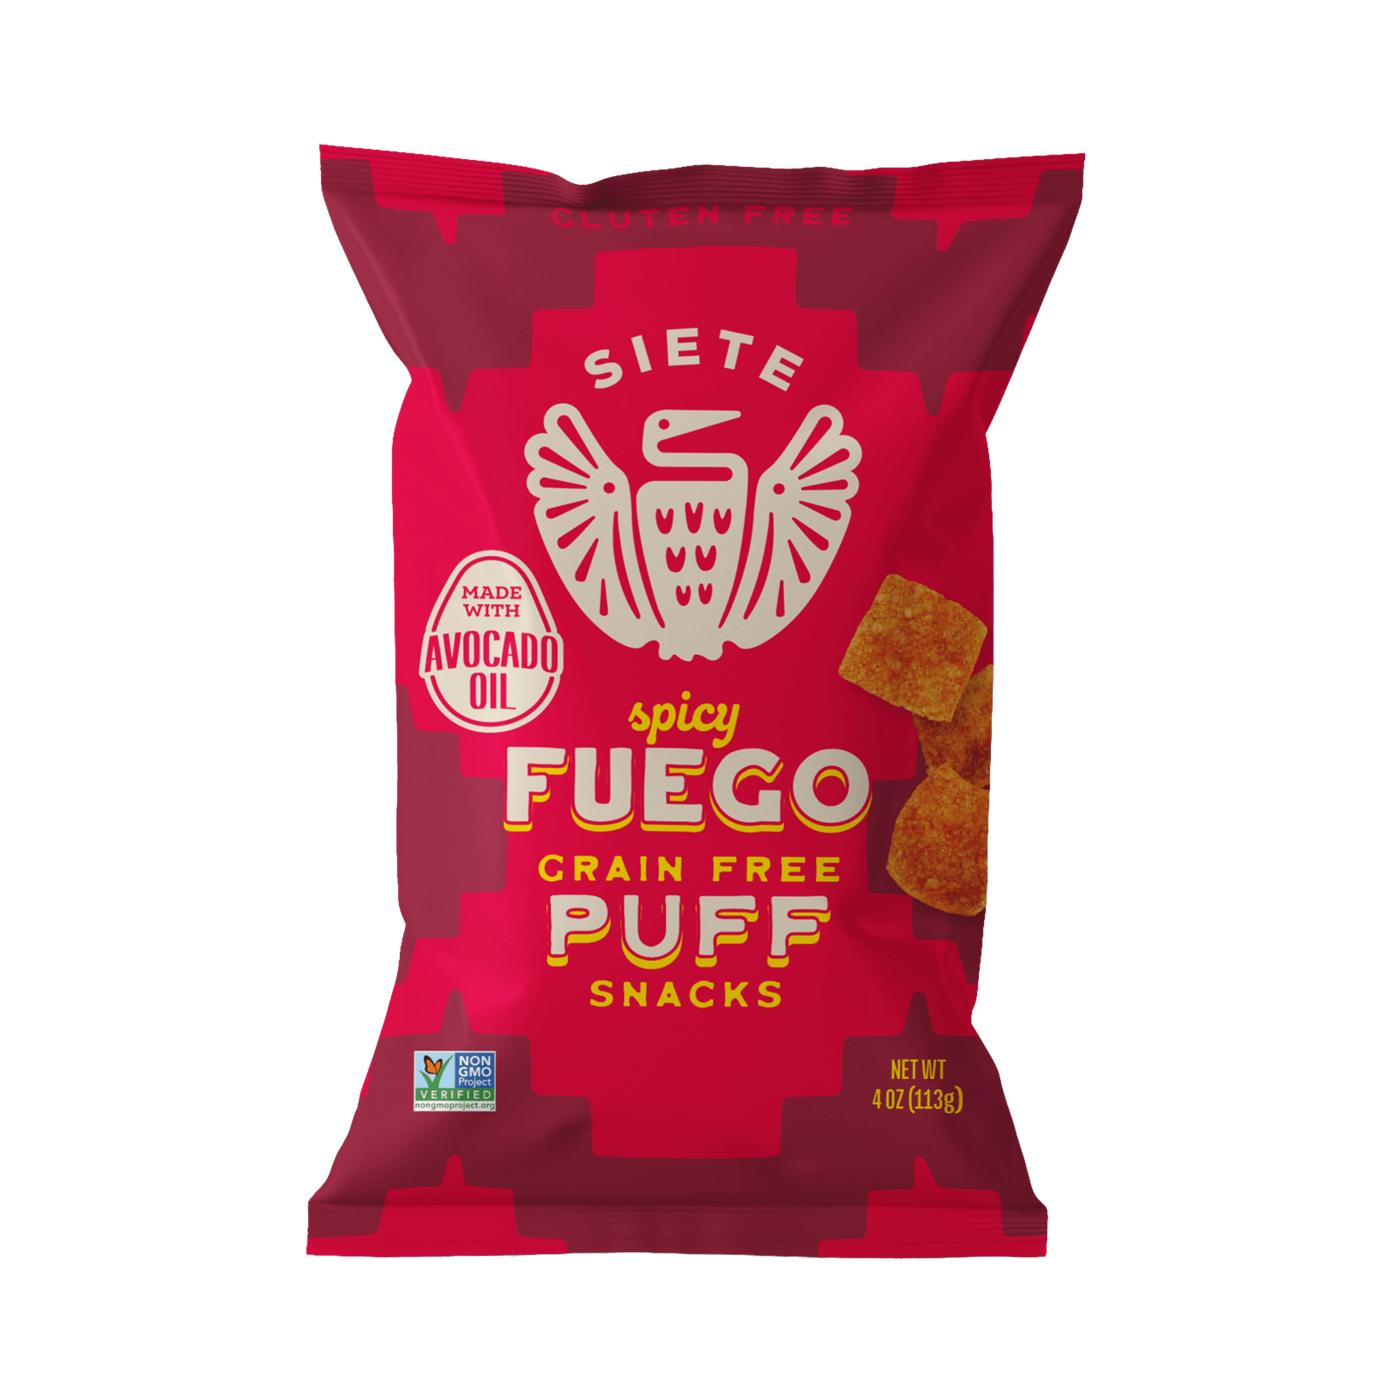 Siete Grain-Free Spicy Fuego Puffs; image 1 of 2